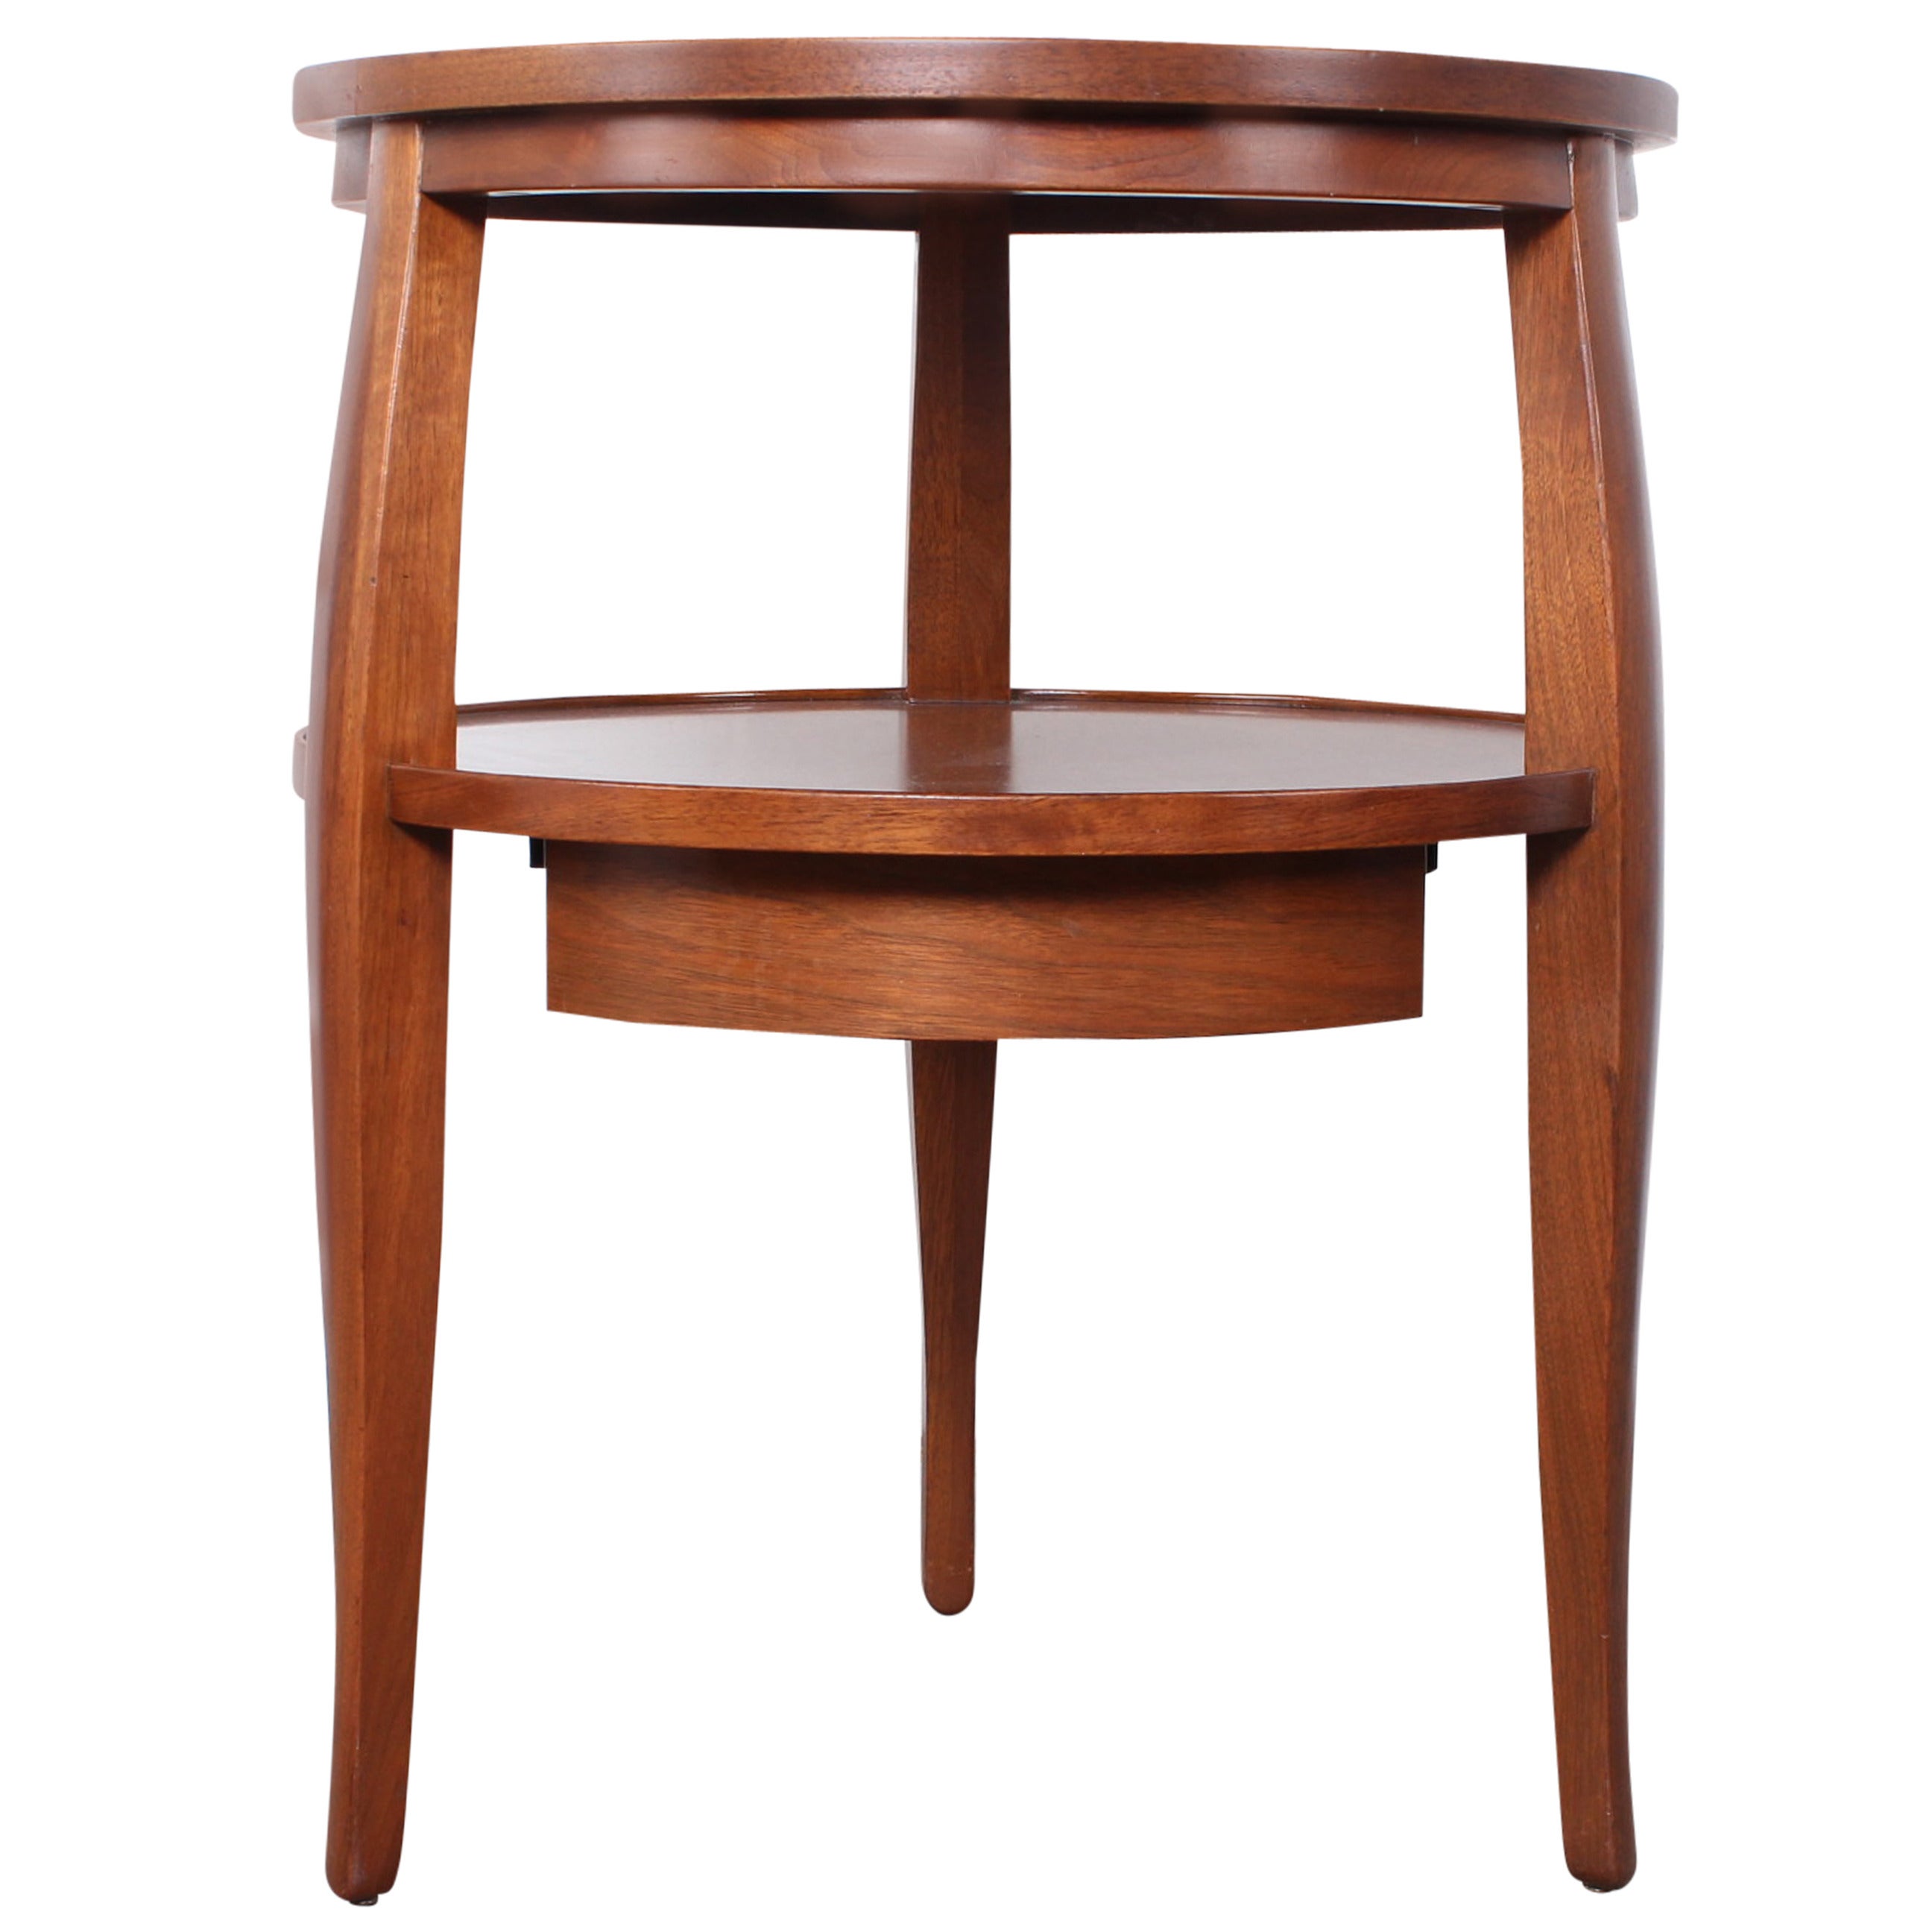 Two-Tier Side Table by Edward Wormley for Dunbar